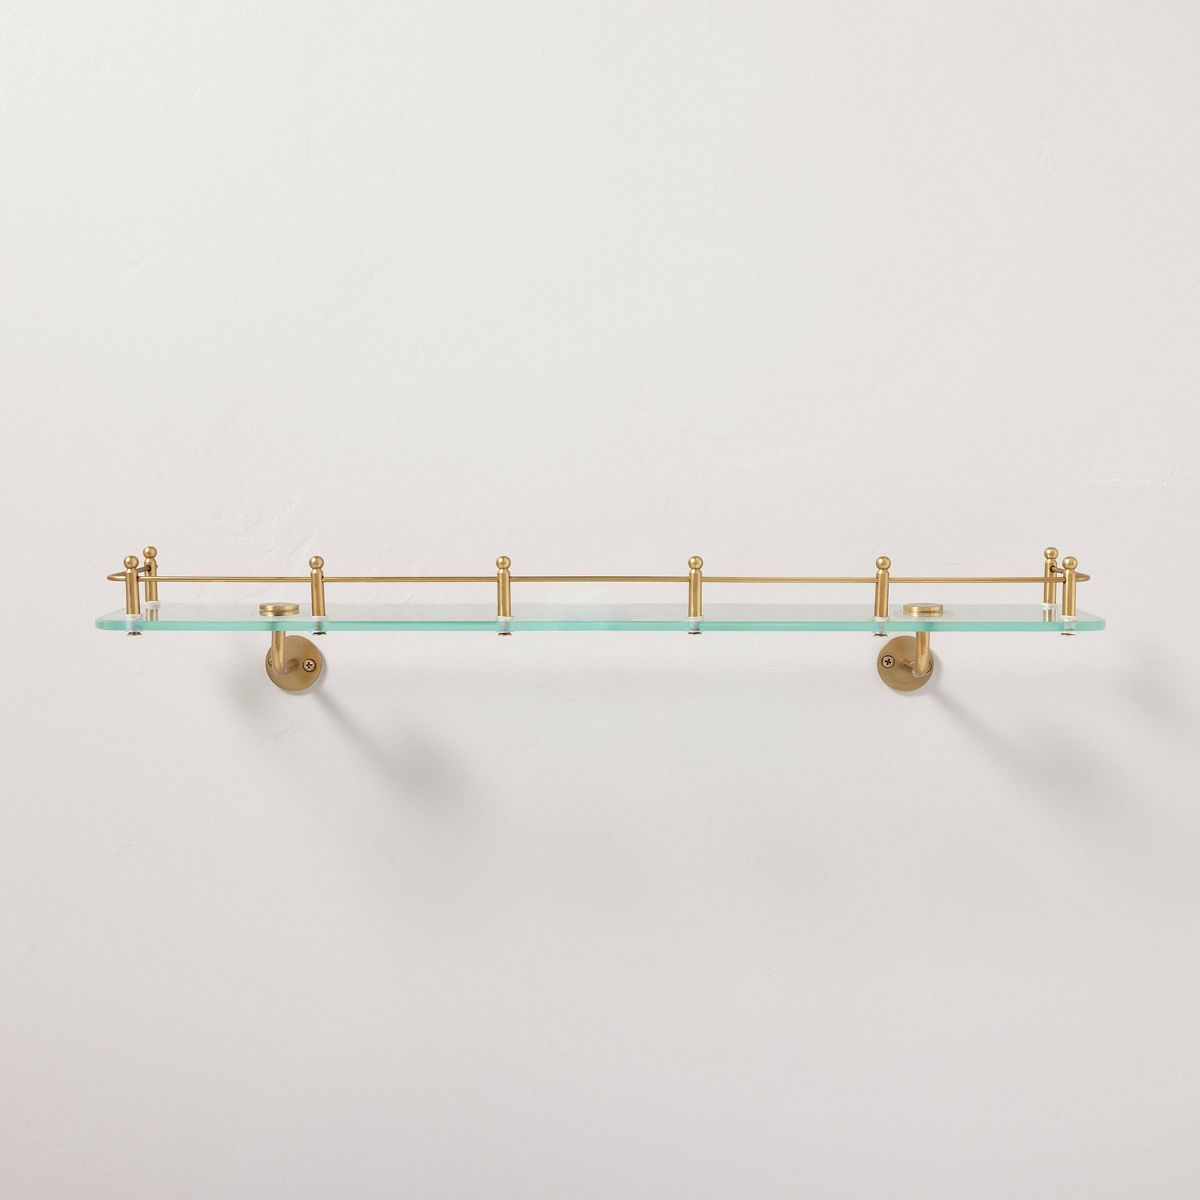 24" Decorative Glass Wall Shelf with Brass Rail - Hearth & Hand™ with Magnolia | Target